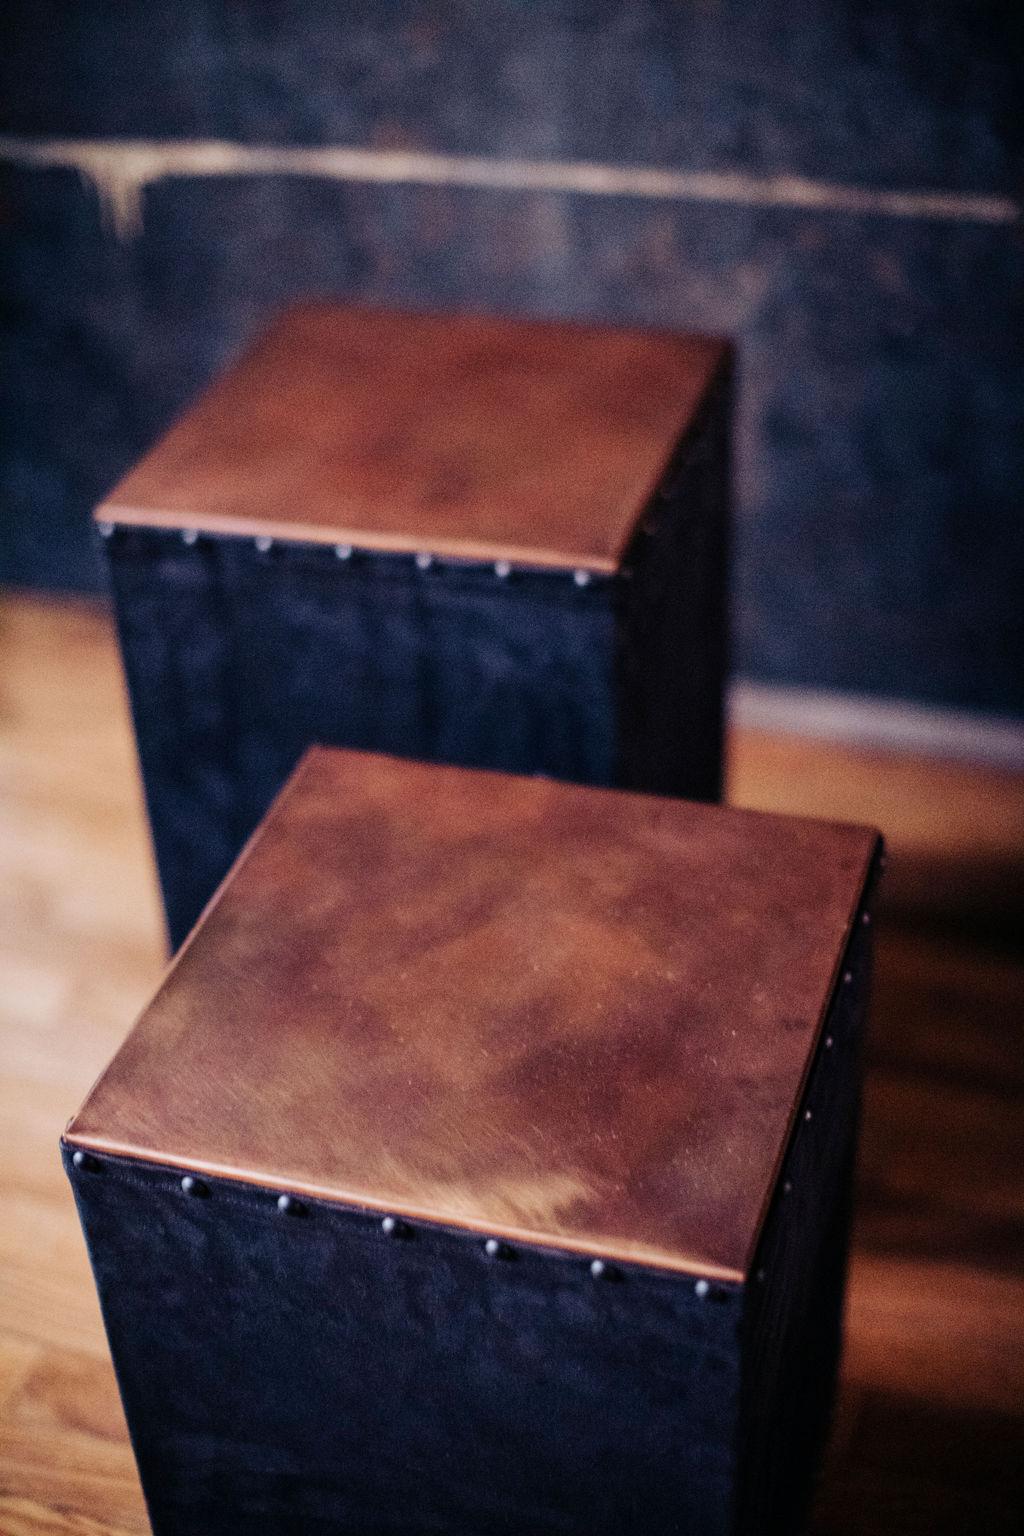 Cawtaba side table, Copper and Leather, Black, Modern and Industrial 

These side tables are topped in a hammered copper and finished in leather. These are part of the Catawba Series designed and scheduled for our January 2022 launch. Each side